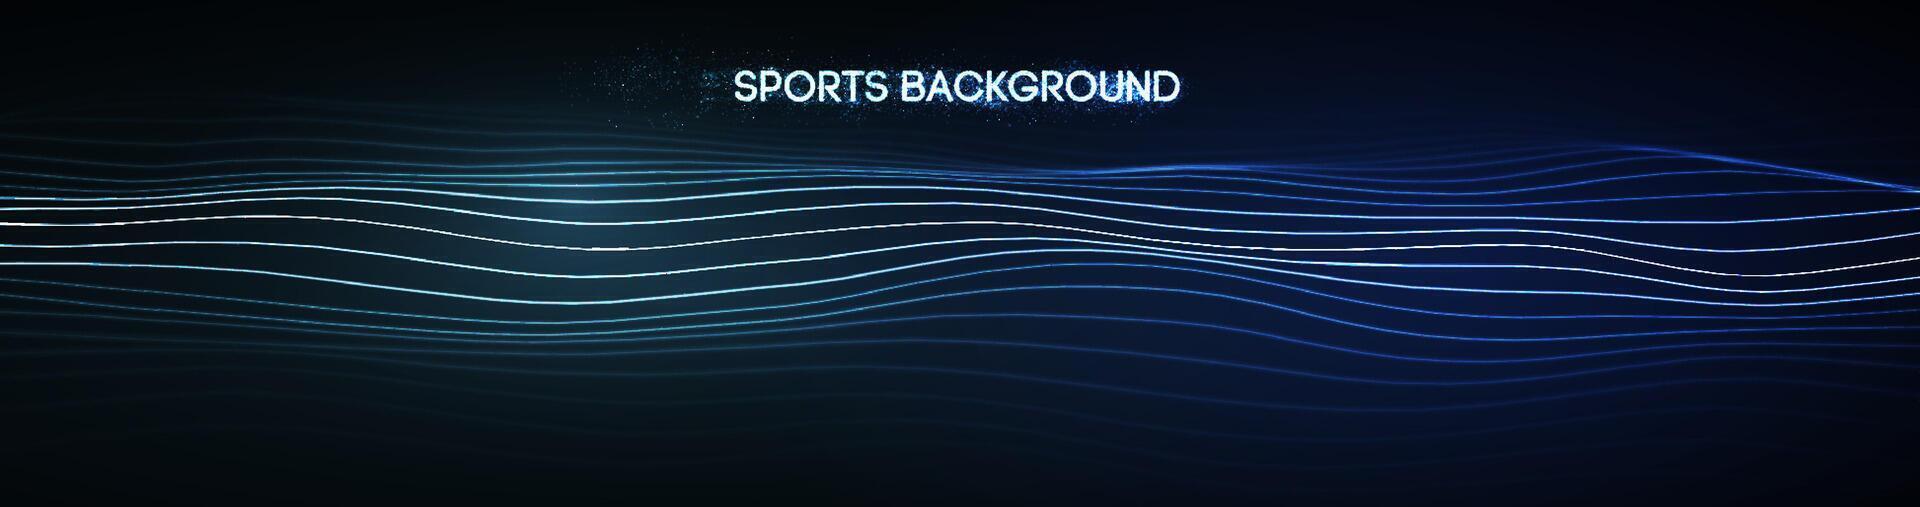 Dynamic blue lines abstract sports background vector. vector